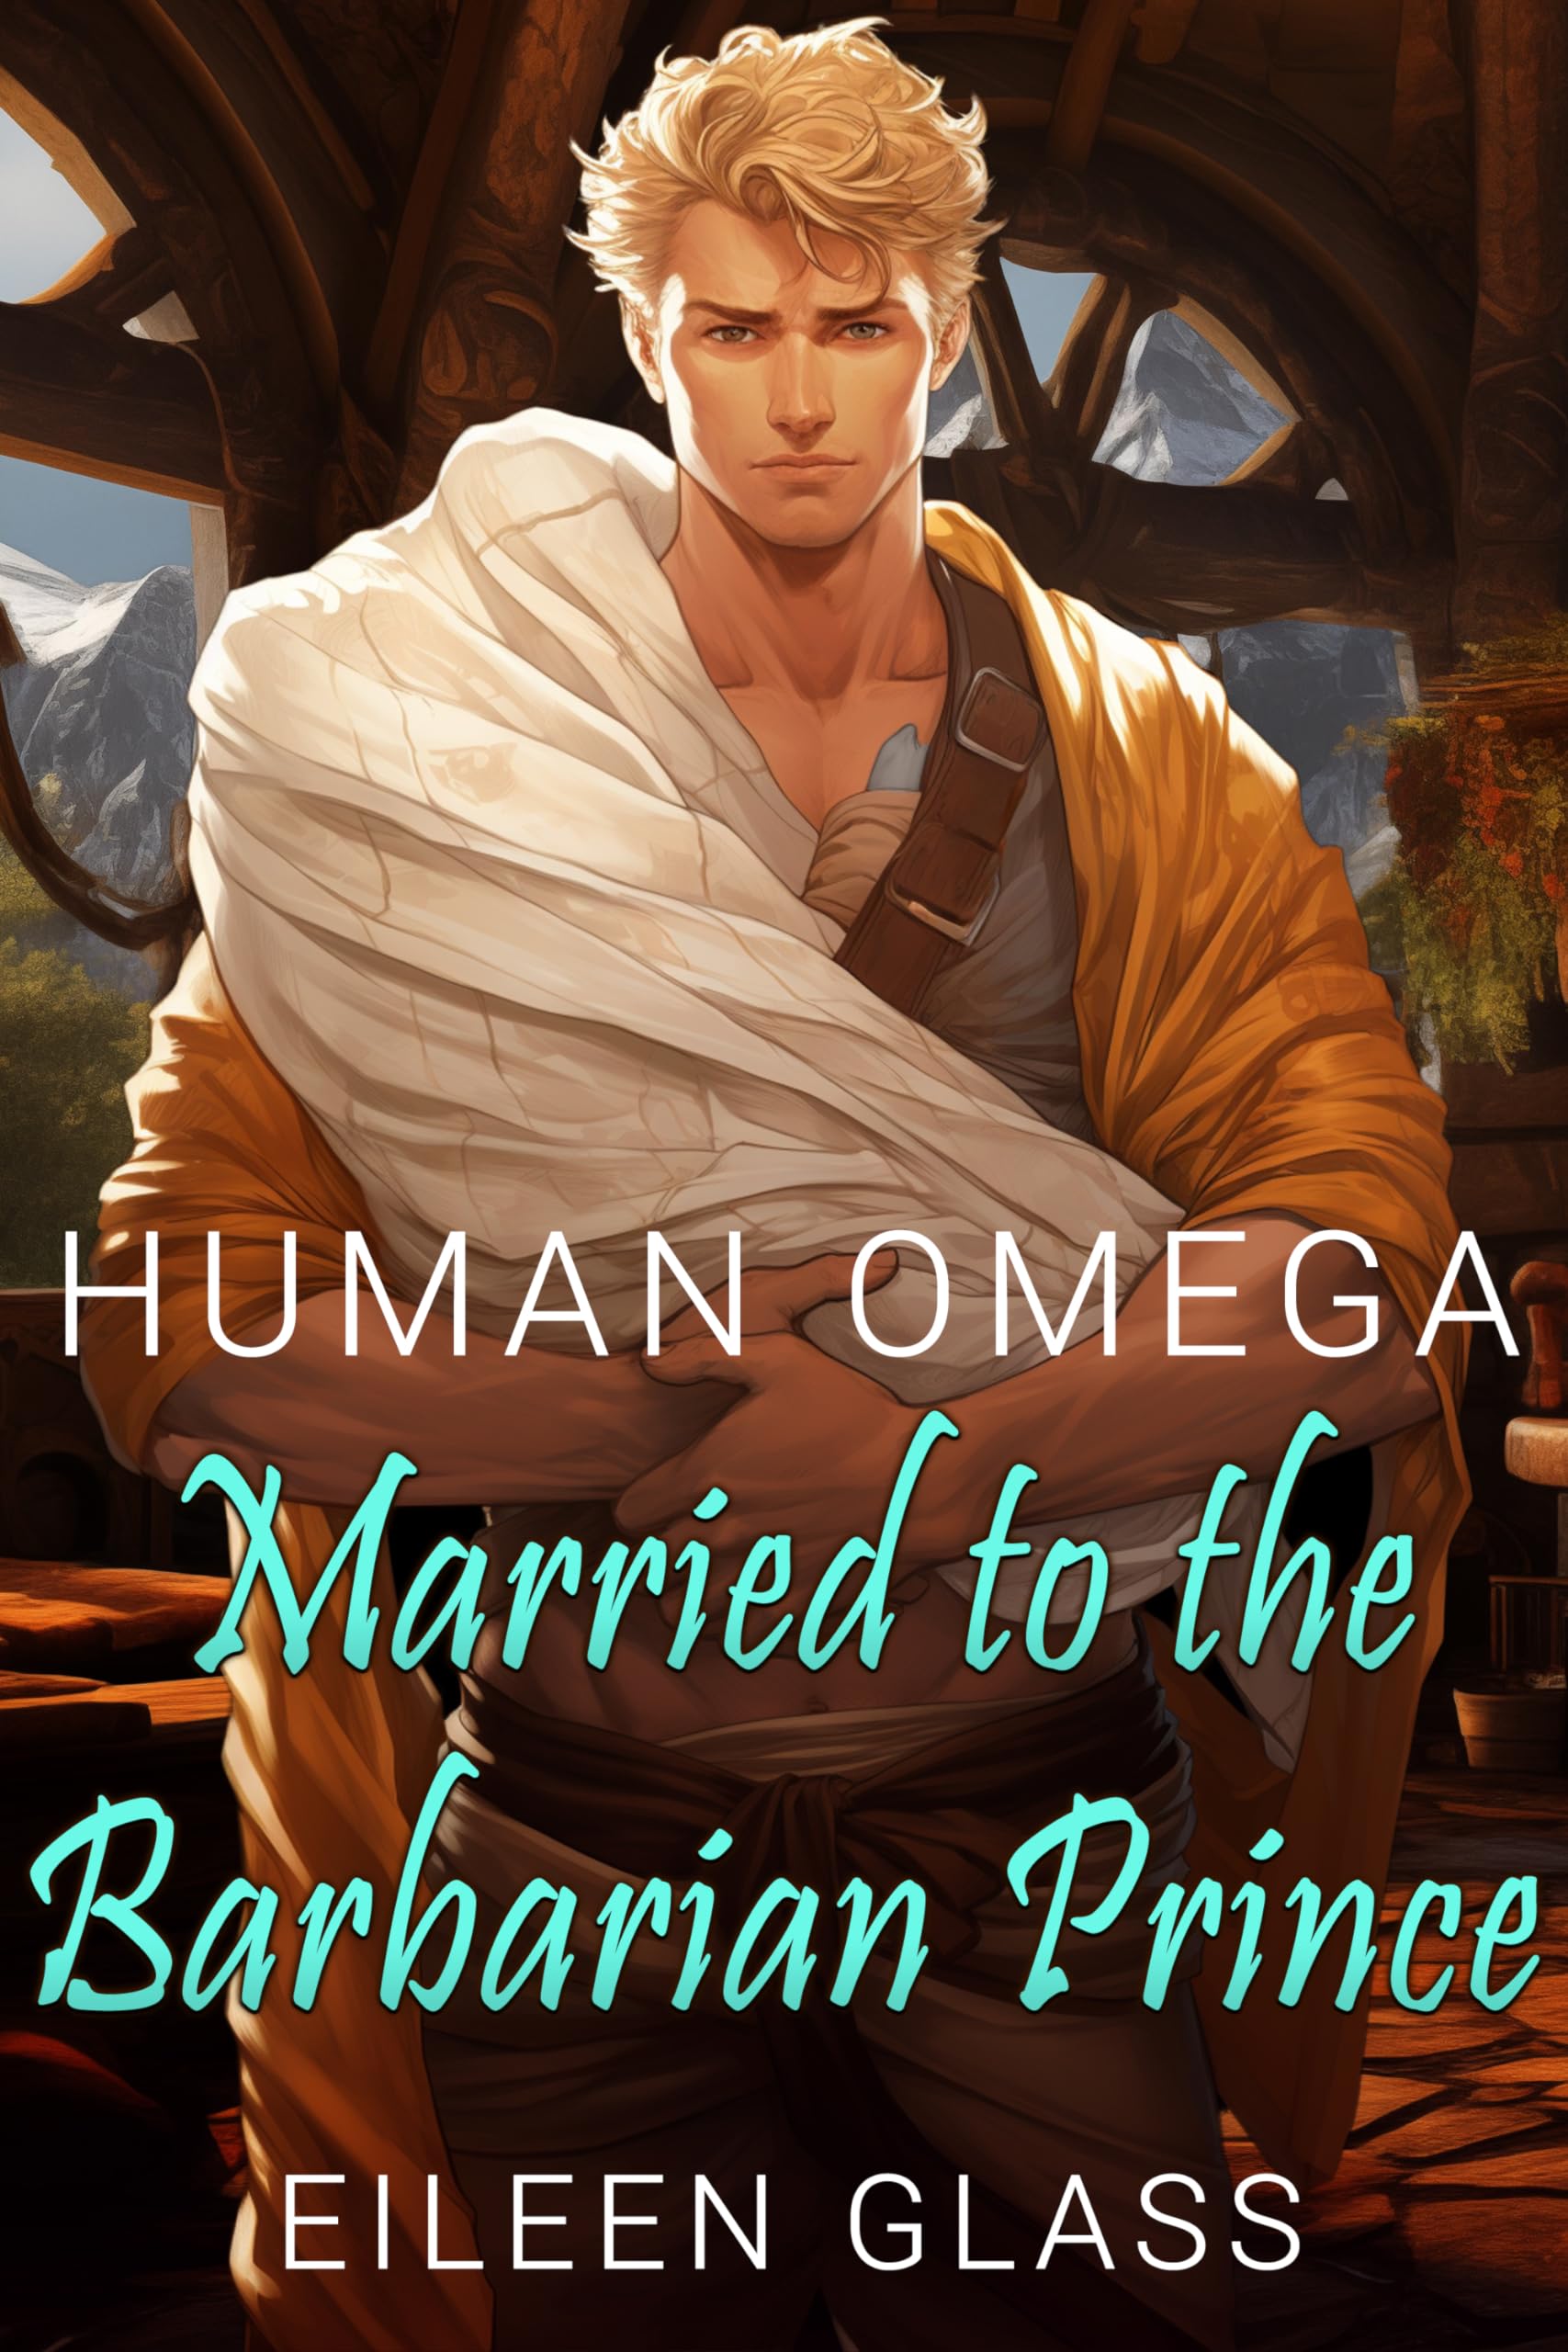 Human Omega: Married to the Barbarian Prince (Pykh Book 4)